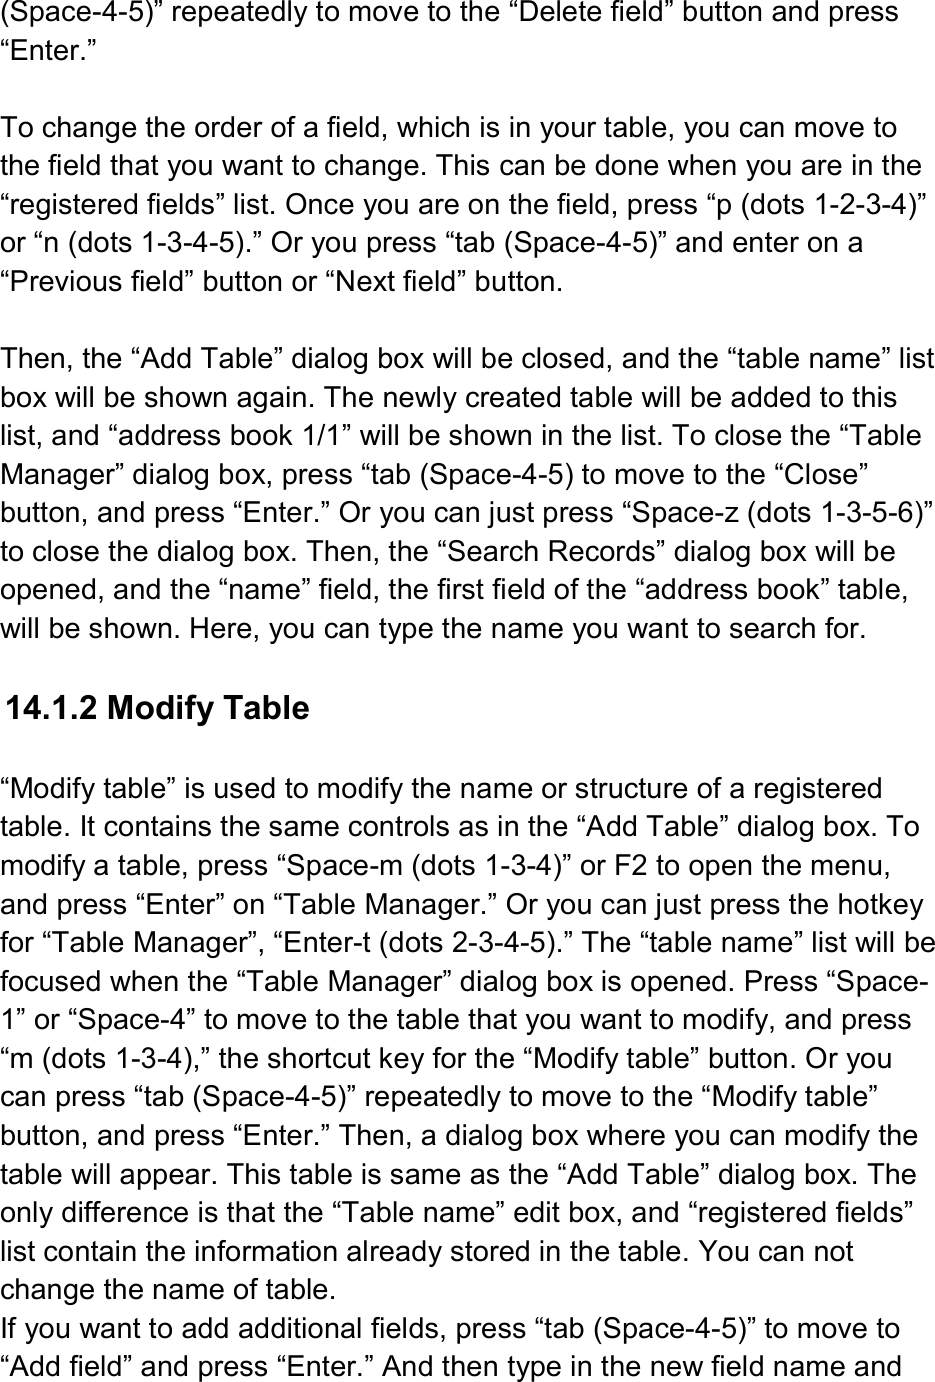  (Space-4-5)” repeatedly to move to the “Delete field” button and press “Enter.”  To change the order of a field, which is in your table, you can move to the field that you want to change. This can be done when you are in the “registered fields” list. Once you are on the field, press “p (dots 1-2-3-4)” or “n (dots 1-3-4-5).” Or you press “tab (Space-4-5)” and enter on a “Previous field” button or “Next field” button.  Then, the “Add Table” dialog box will be closed, and the “table name” list box will be shown again. The newly created table will be added to this list, and “address book 1/1” will be shown in the list. To close the “Table Manager” dialog box, press “tab (Space-4-5) to move to the “Close” button, and press “Enter.” Or you can just press “Space-z (dots 1-3-5-6)” to close the dialog box. Then, the “Search Records” dialog box will be opened, and the “name” field, the first field of the “address book” table, will be shown. Here, you can type the name you want to search for.  14.1.2 Modify Table  “Modify table” is used to modify the name or structure of a registered table. It contains the same controls as in the “Add Table” dialog box. To modify a table, press “Space-m (dots 1-3-4)” or F2 to open the menu, and press “Enter” on “Table Manager.” Or you can just press the hotkey for “Table Manager”, “Enter-t (dots 2-3-4-5).” The “table name” list will be focused when the “Table Manager” dialog box is opened. Press “Space-1” or “Space-4” to move to the table that you want to modify, and press “m (dots 1-3-4),” the shortcut key for the “Modify table” button. Or you can press “tab (Space-4-5)” repeatedly to move to the “Modify table” button, and press “Enter.” Then, a dialog box where you can modify the table will appear. This table is same as the “Add Table” dialog box. The only difference is that the “Table name” edit box, and “registered fields” list contain the information already stored in the table. You can not change the name of table. If you want to add additional fields, press “tab (Space-4-5)” to move to “Add field” and press “Enter.” And then type in the new field name and 